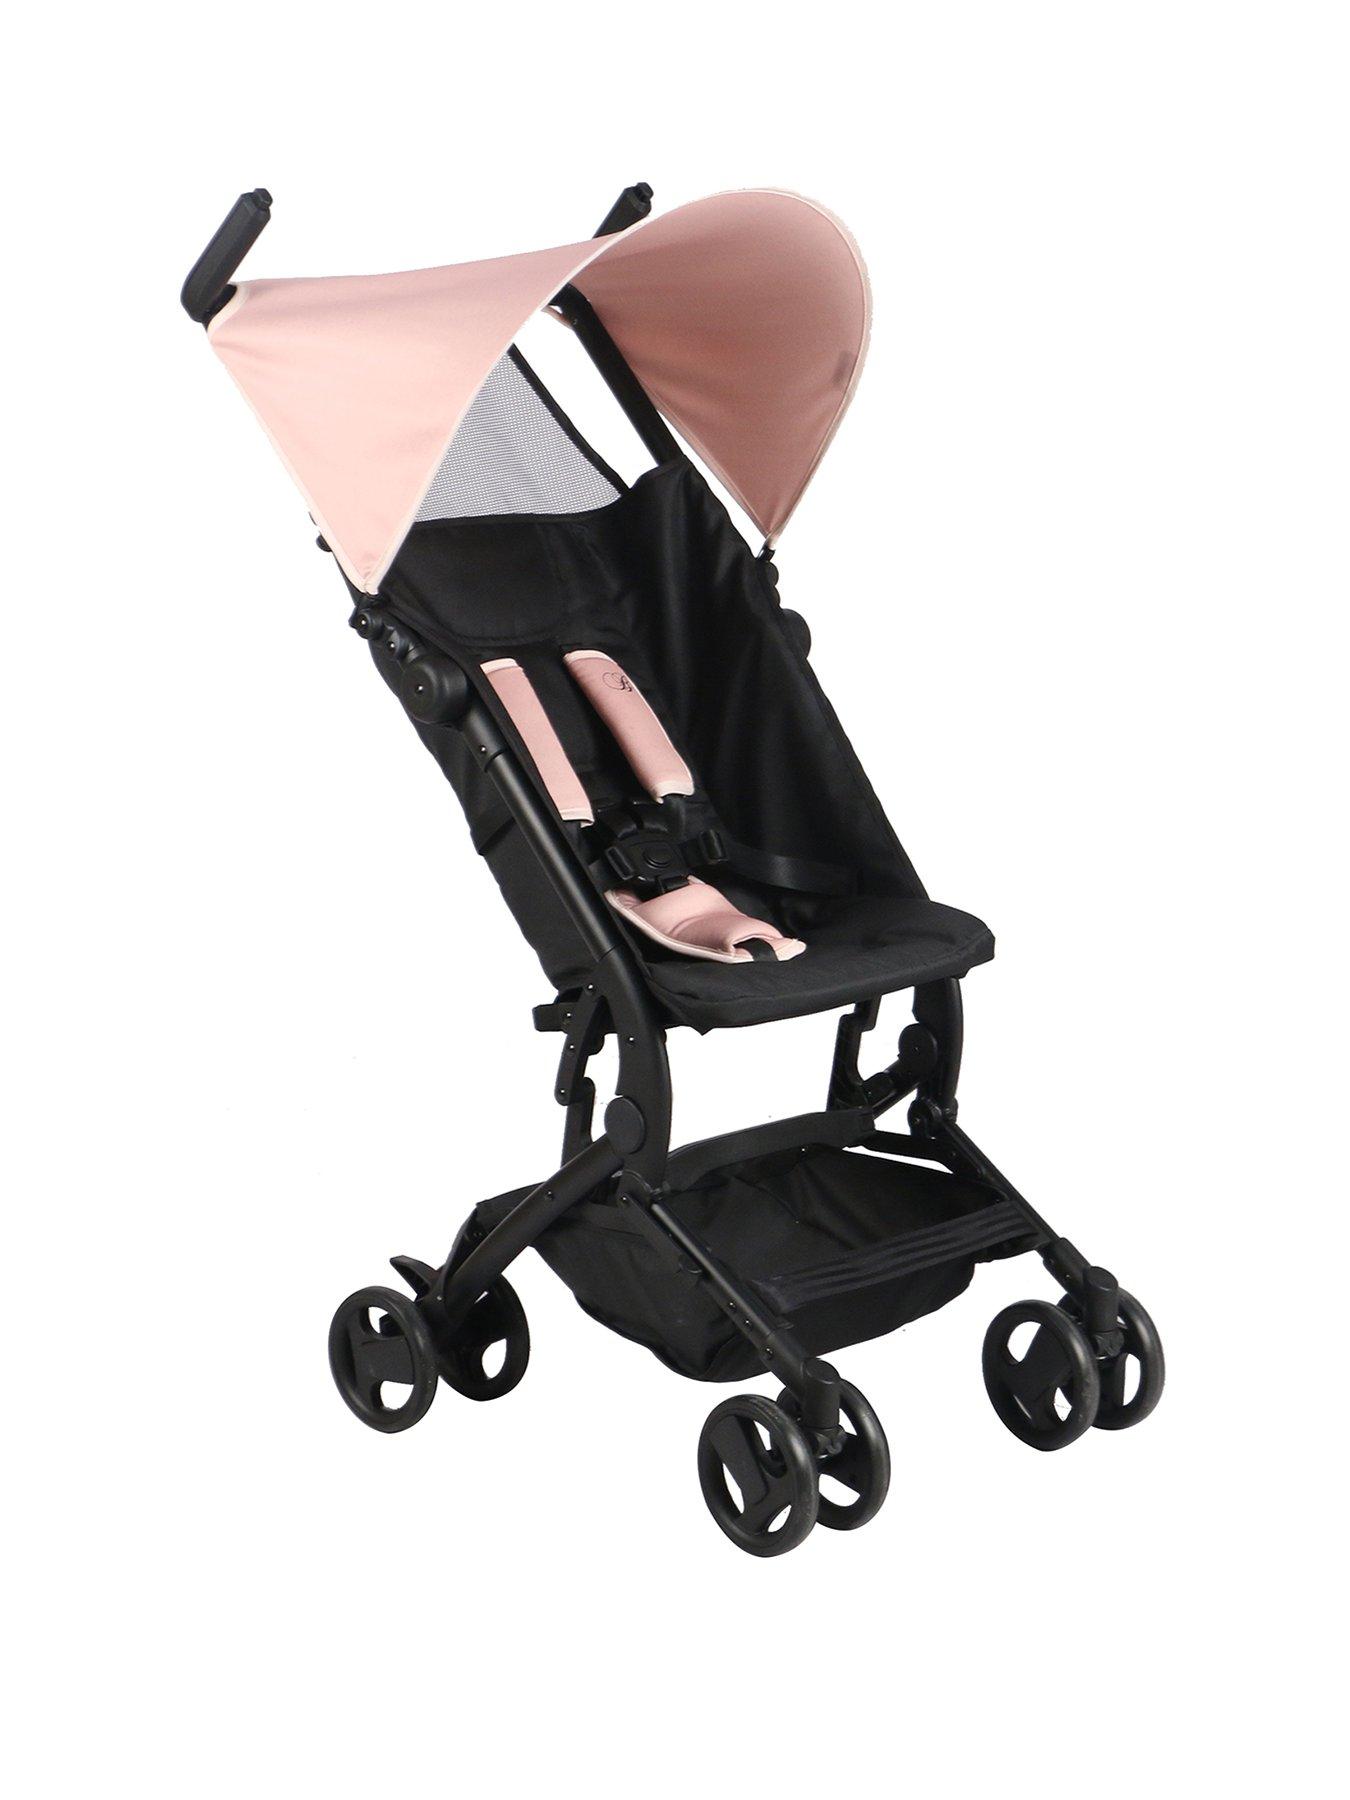 My Babiie Mbx5 Ultra Compact Stroller - Pink